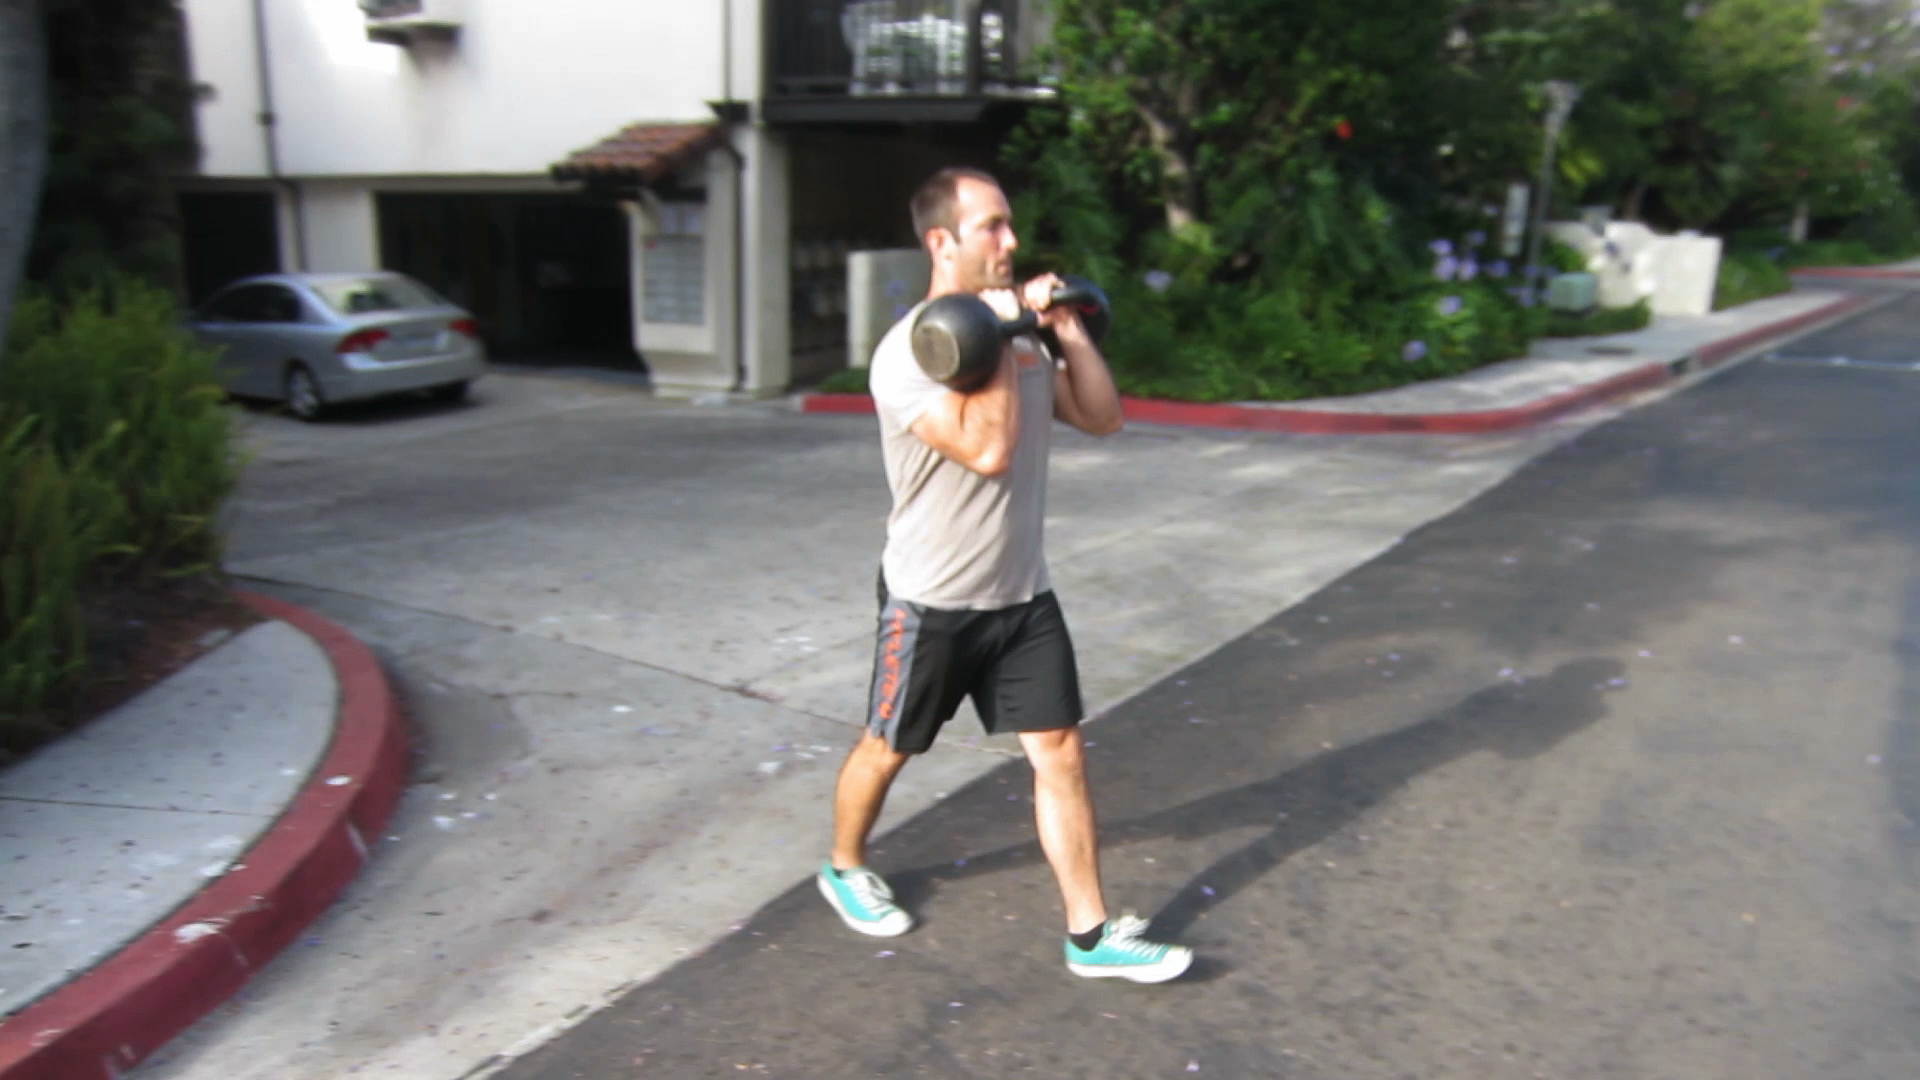 Twisted undervandsbåd lys pære 12 Loaded Carries With Kettlebells — Strong Made Simple, San Diego Personal  Trainer